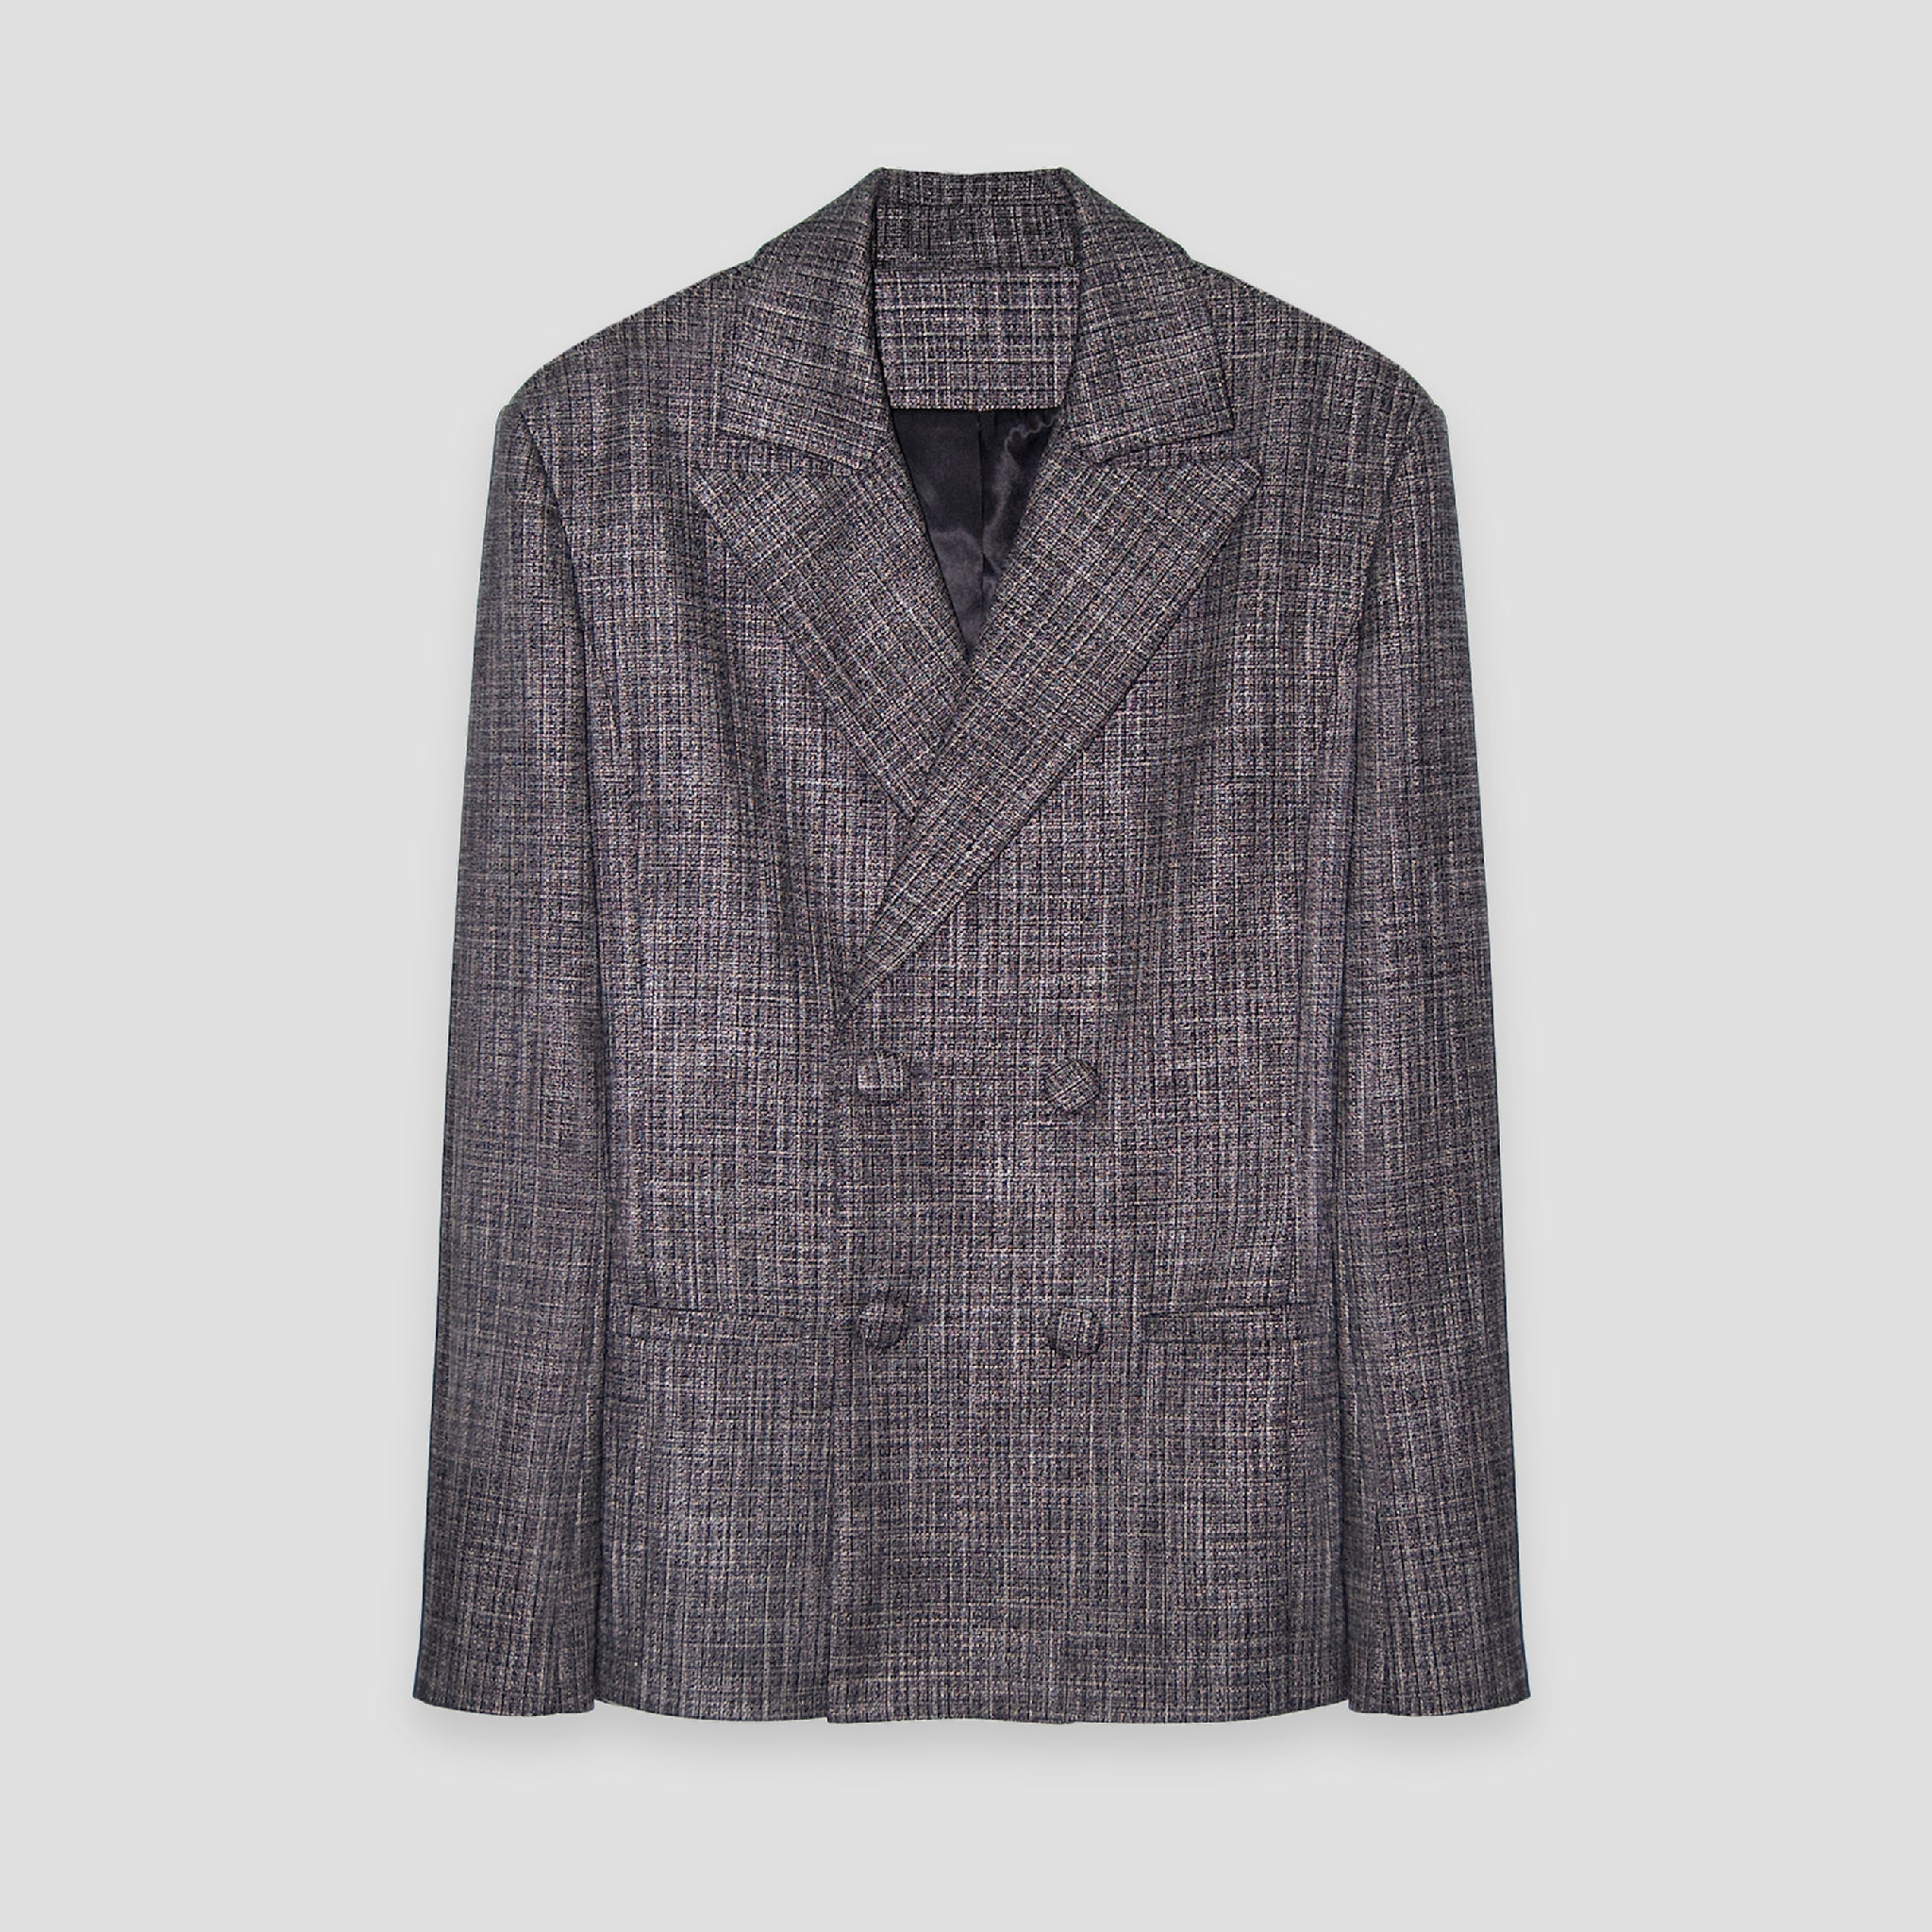 DOUBLE-BREASTED TAILORED JACKET